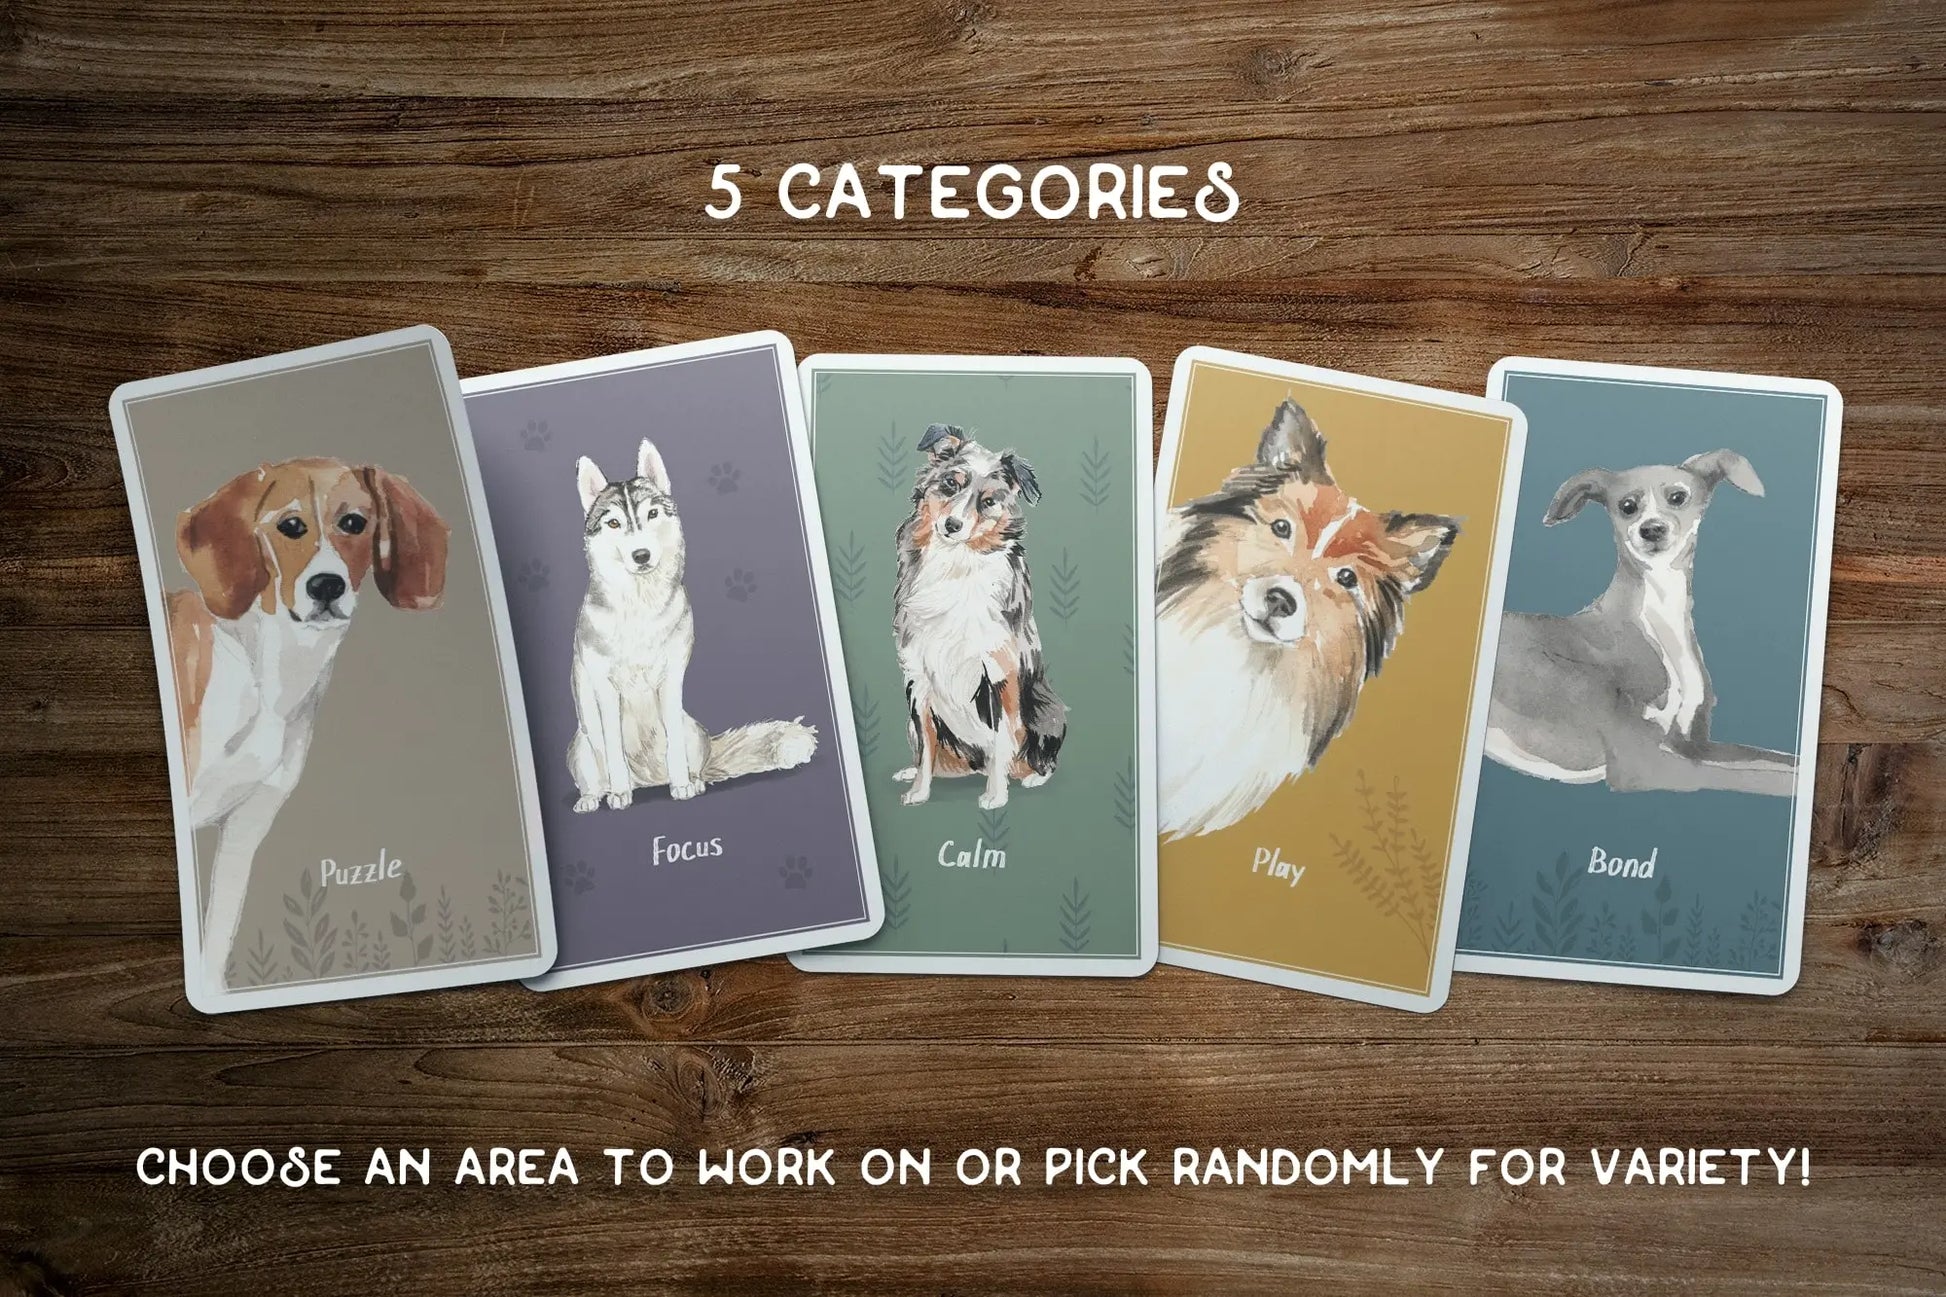 Five illustrated cards depicting dogs on a wooden surface, each labeled with categories like "DIY puzzle toys," "focus," "Calm Dog Games - Brain Games & Enrichment Activity Deck," "play," and "bond.